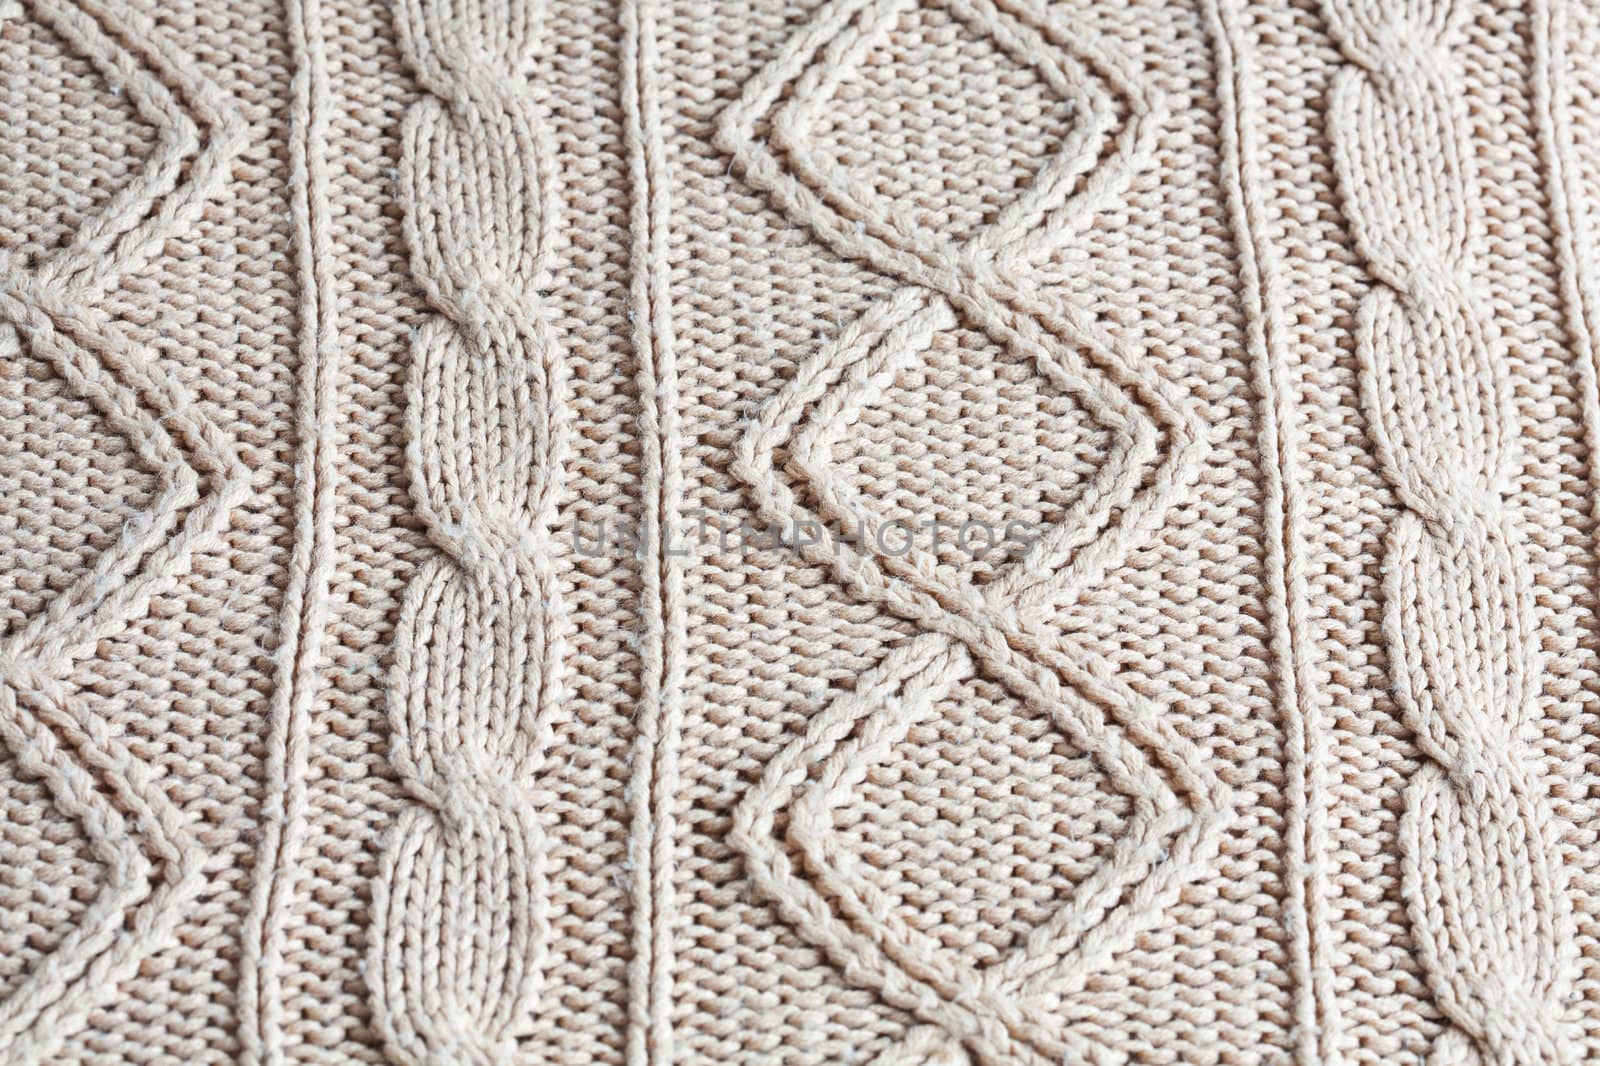 Knitted cloth as a background.